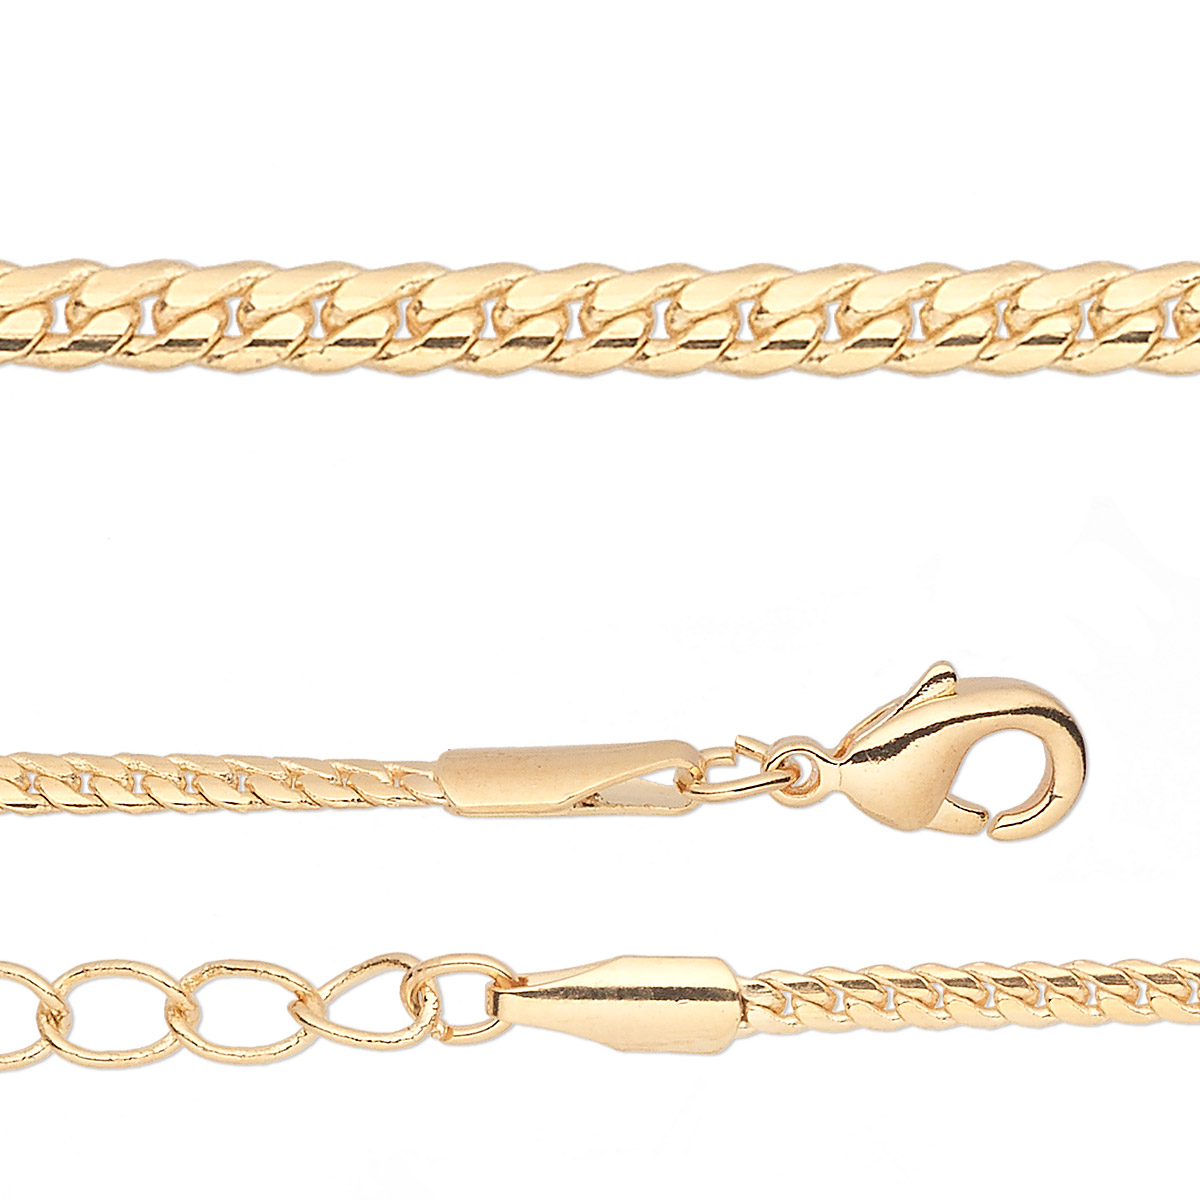 Chain, gold-finished brass, 2mm curb, 18 inches with 1-1/4 inch ...